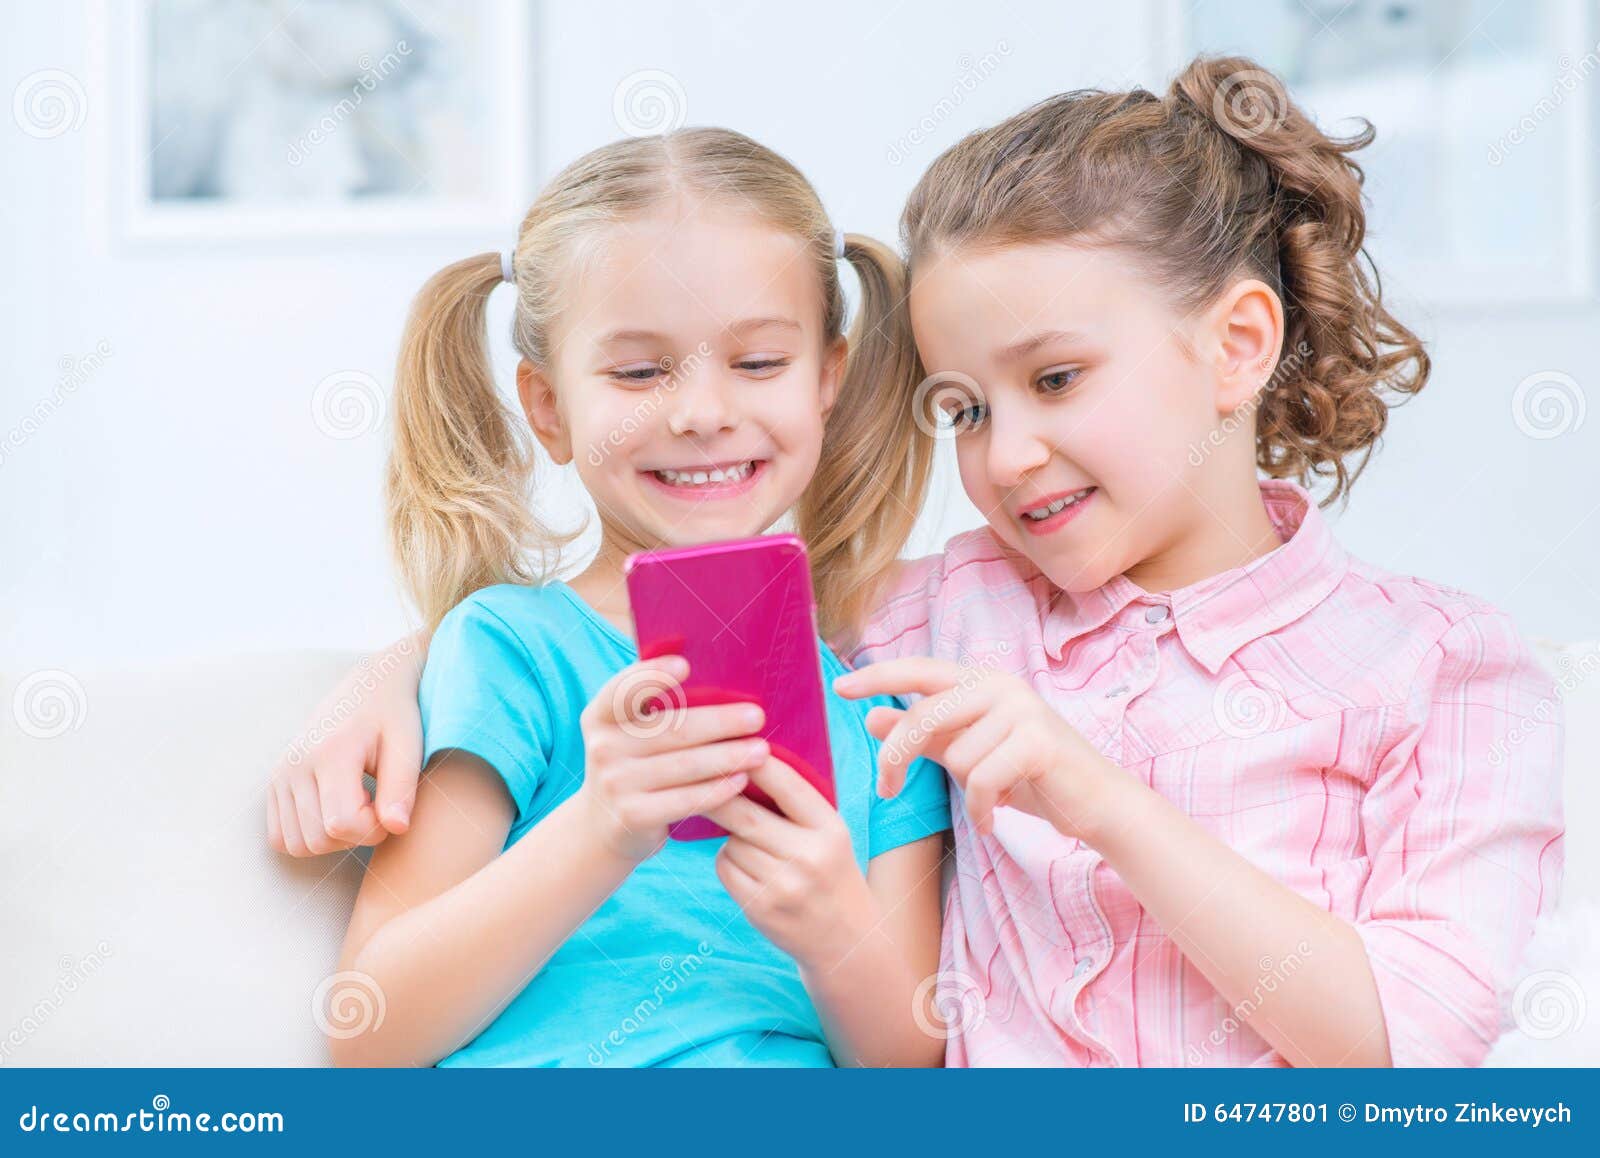 Cheerful Little Sisters Sitting on the Sofa Stock Image - Image of ...